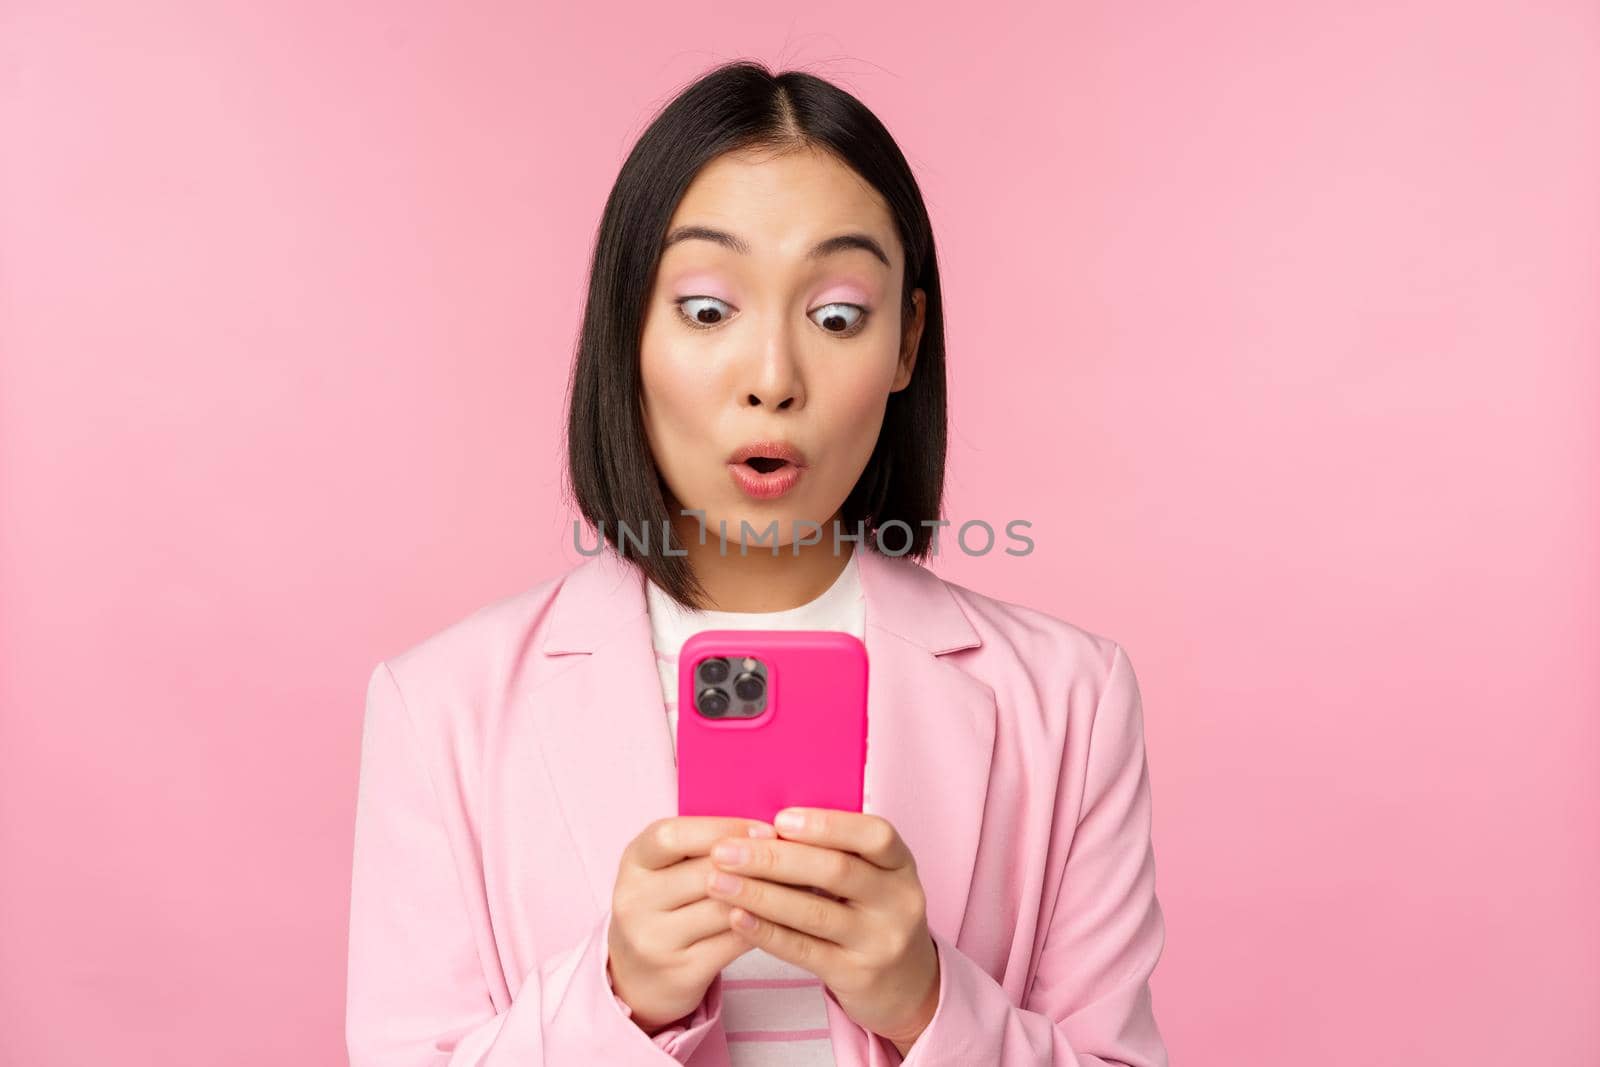 Portrait of asian businesswoman with surprised face, using smartphone app, wearing business suit. Korean girl with mobile phone and excited face expression, pink background.